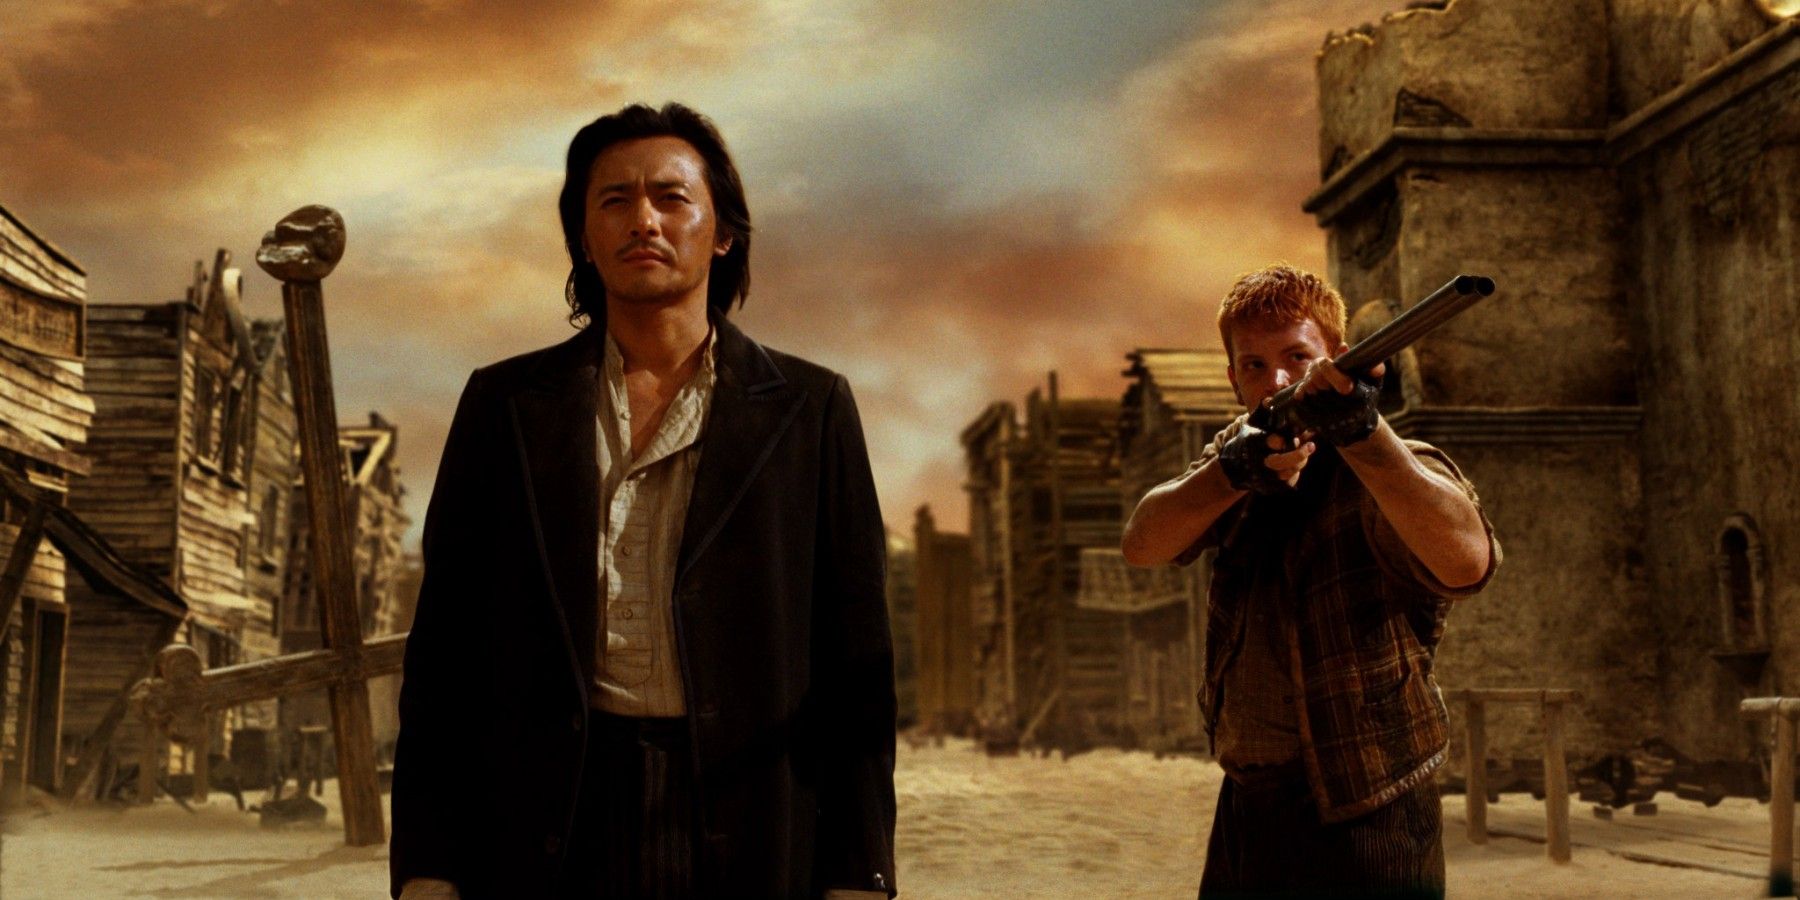 The 10 Worst Western Movies Of The Decade (According To Rotten Tomatoes)